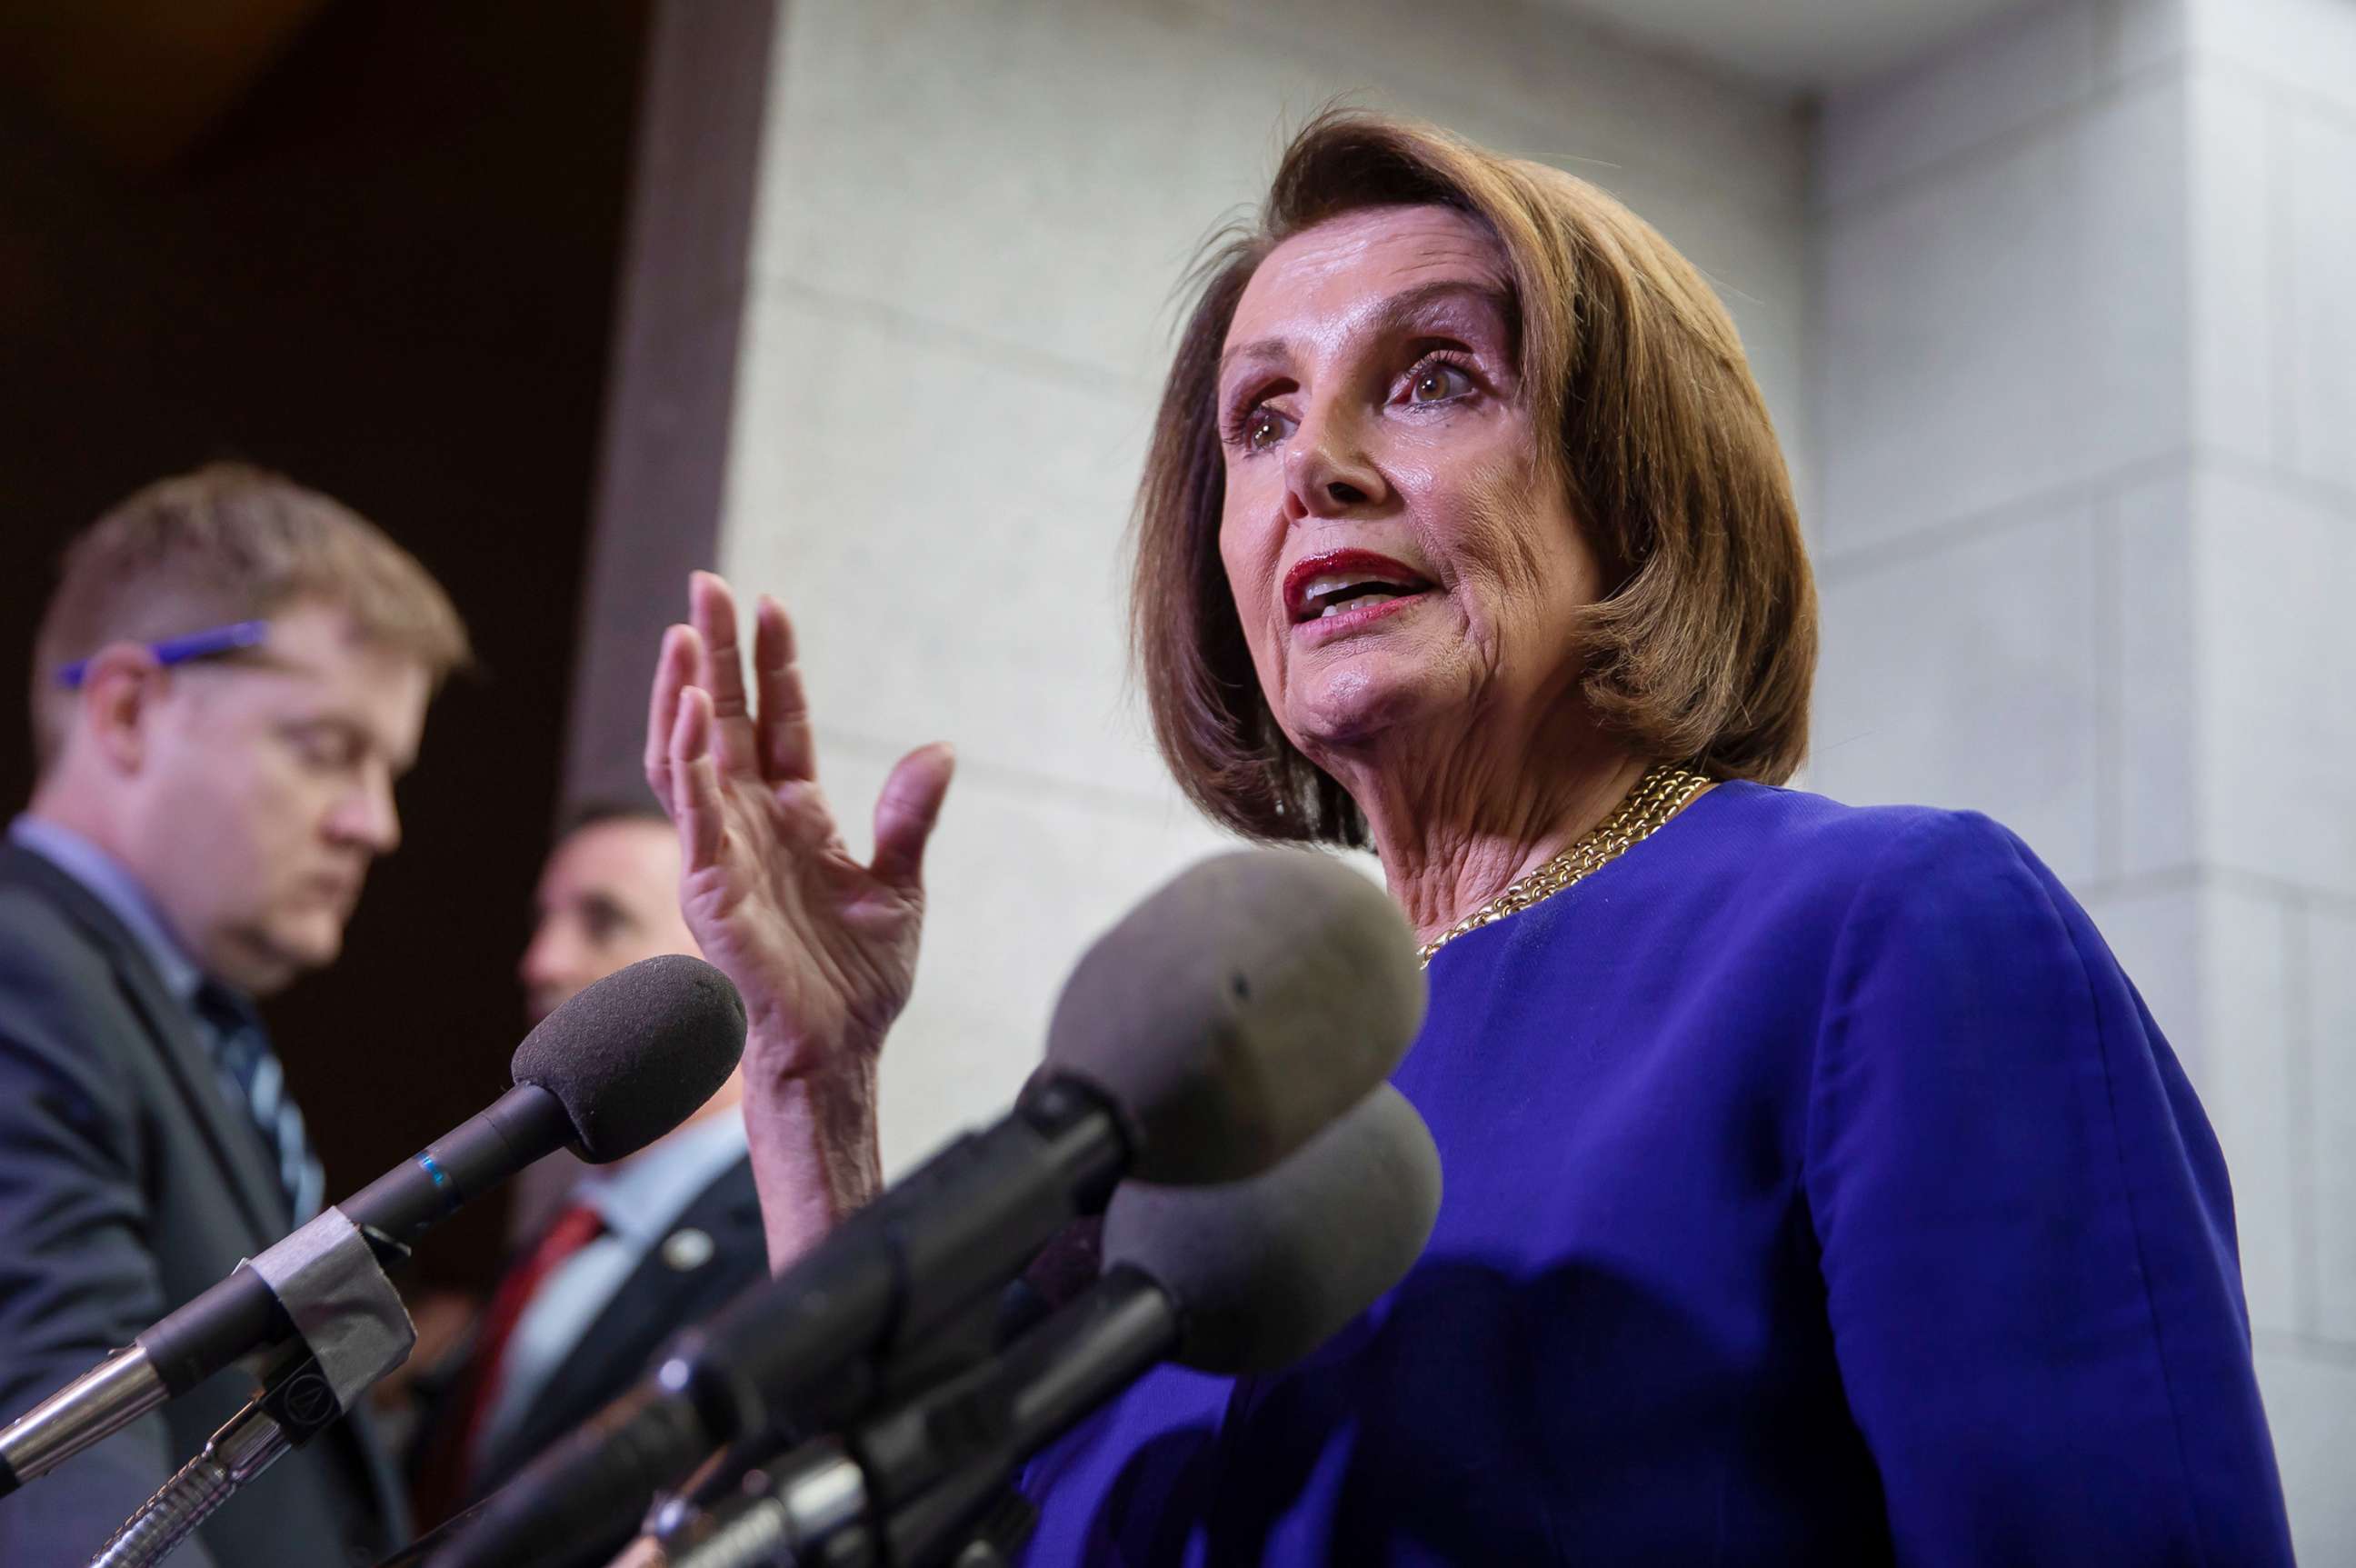 PHOTO: Speaker of the House Nancy Pelosi briefly speaks to the news media after leaving a House Democratic Caucus meeting at the Capitol in Washington, May 22, 2019.